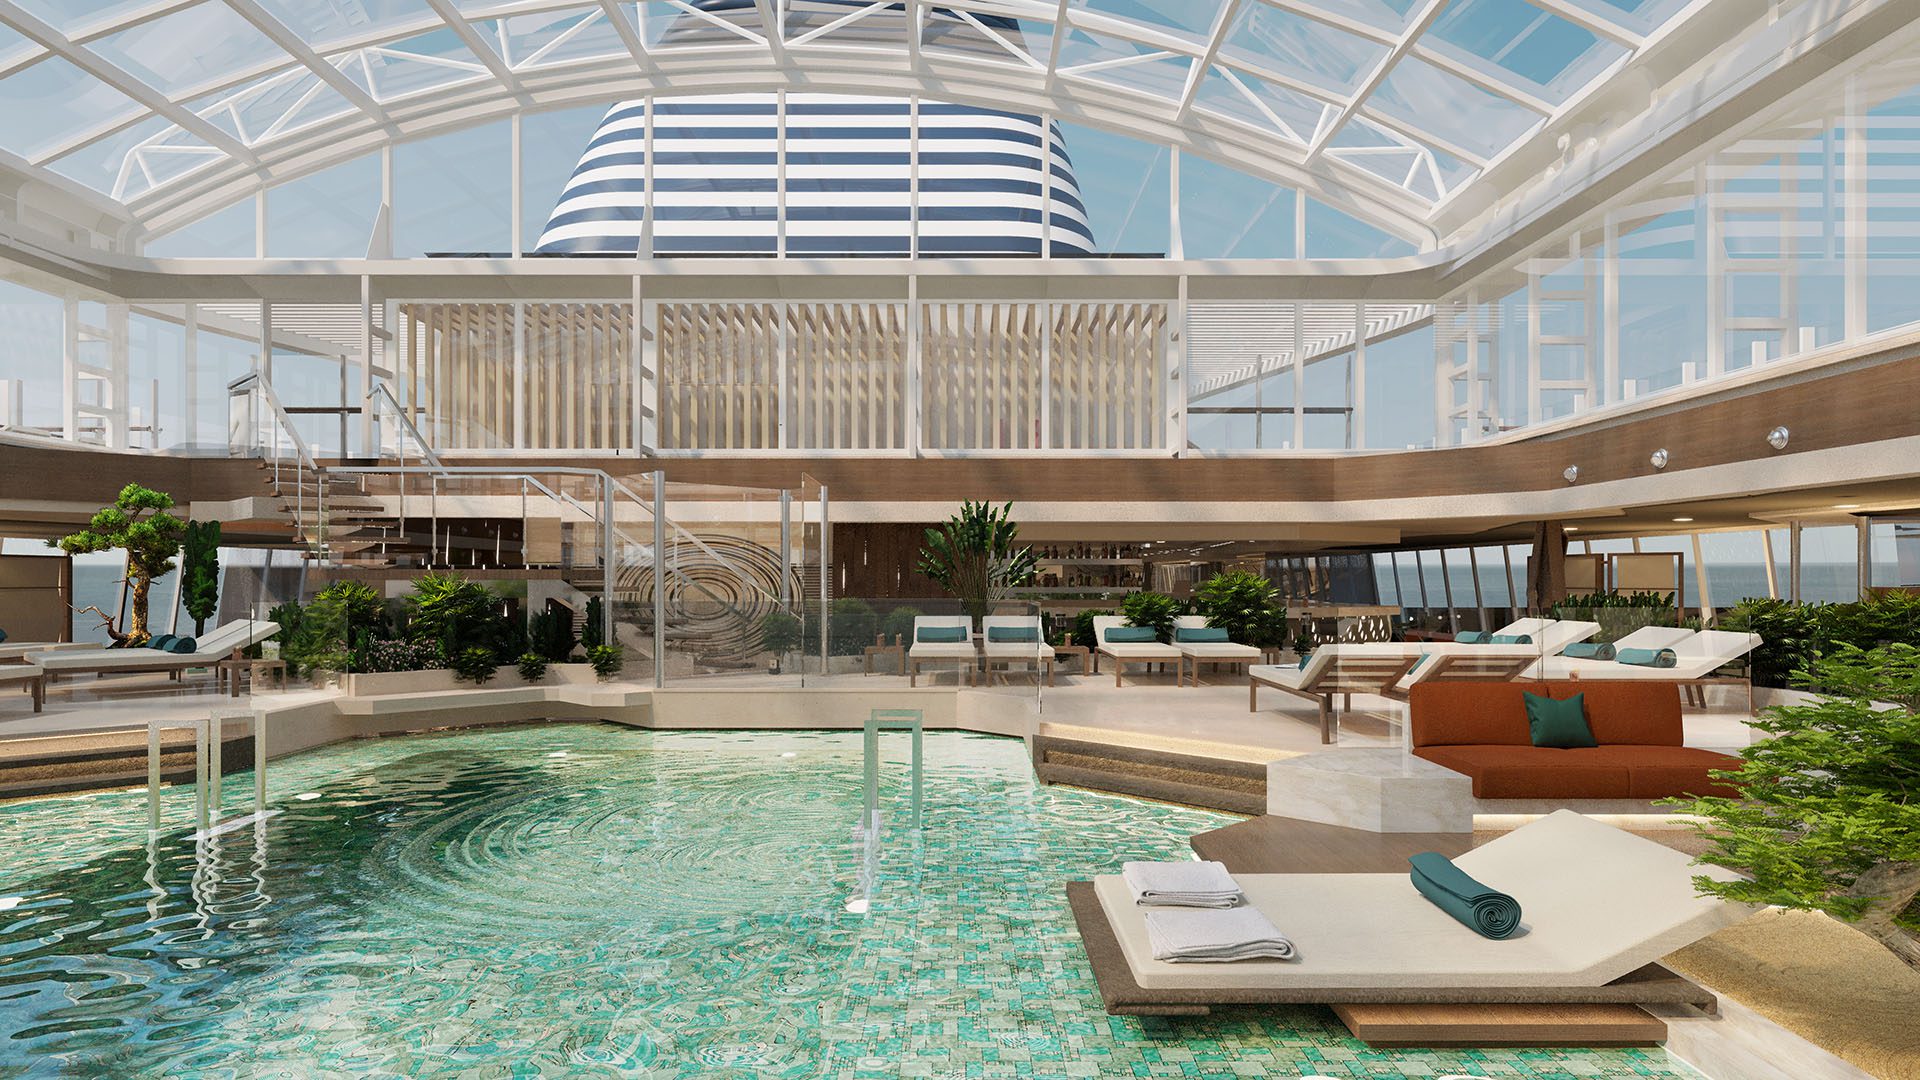 The indoor pool on Explora I with a retractable glass roof will allow swimming and poolside relaxation in any weather